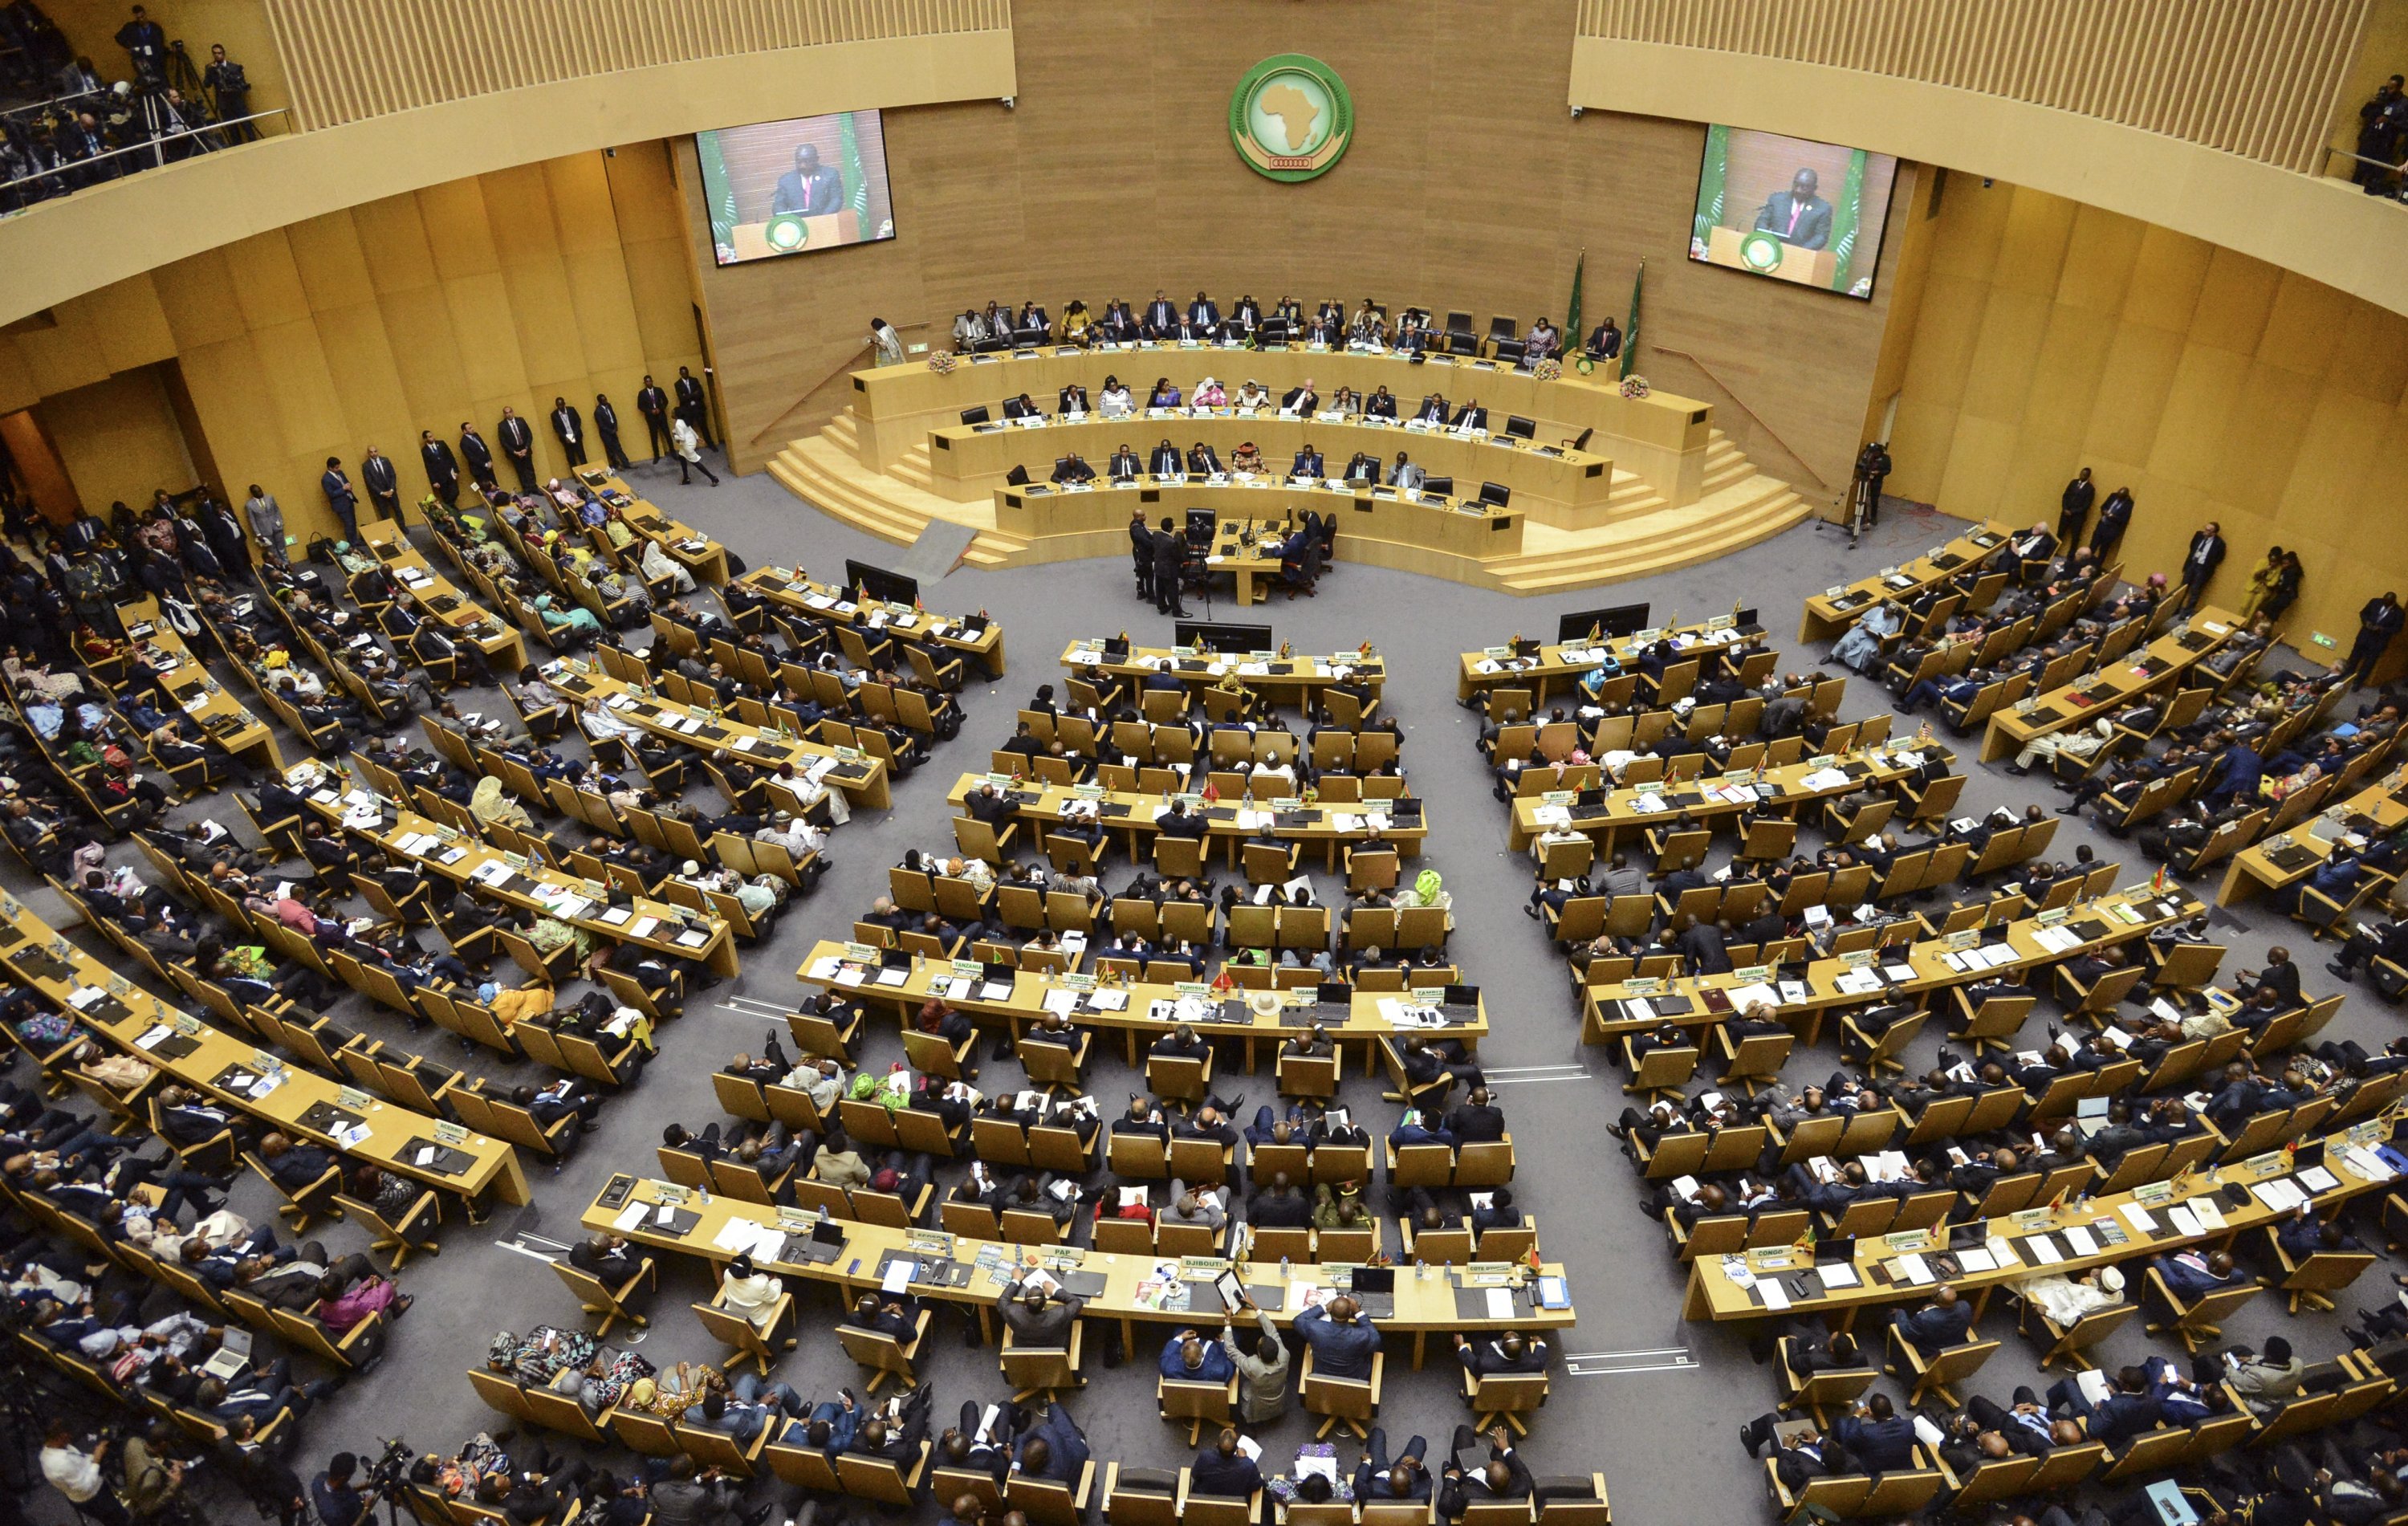 Inexplicable': S. Africa slams Israel's African Union observer status | Daily Sabah